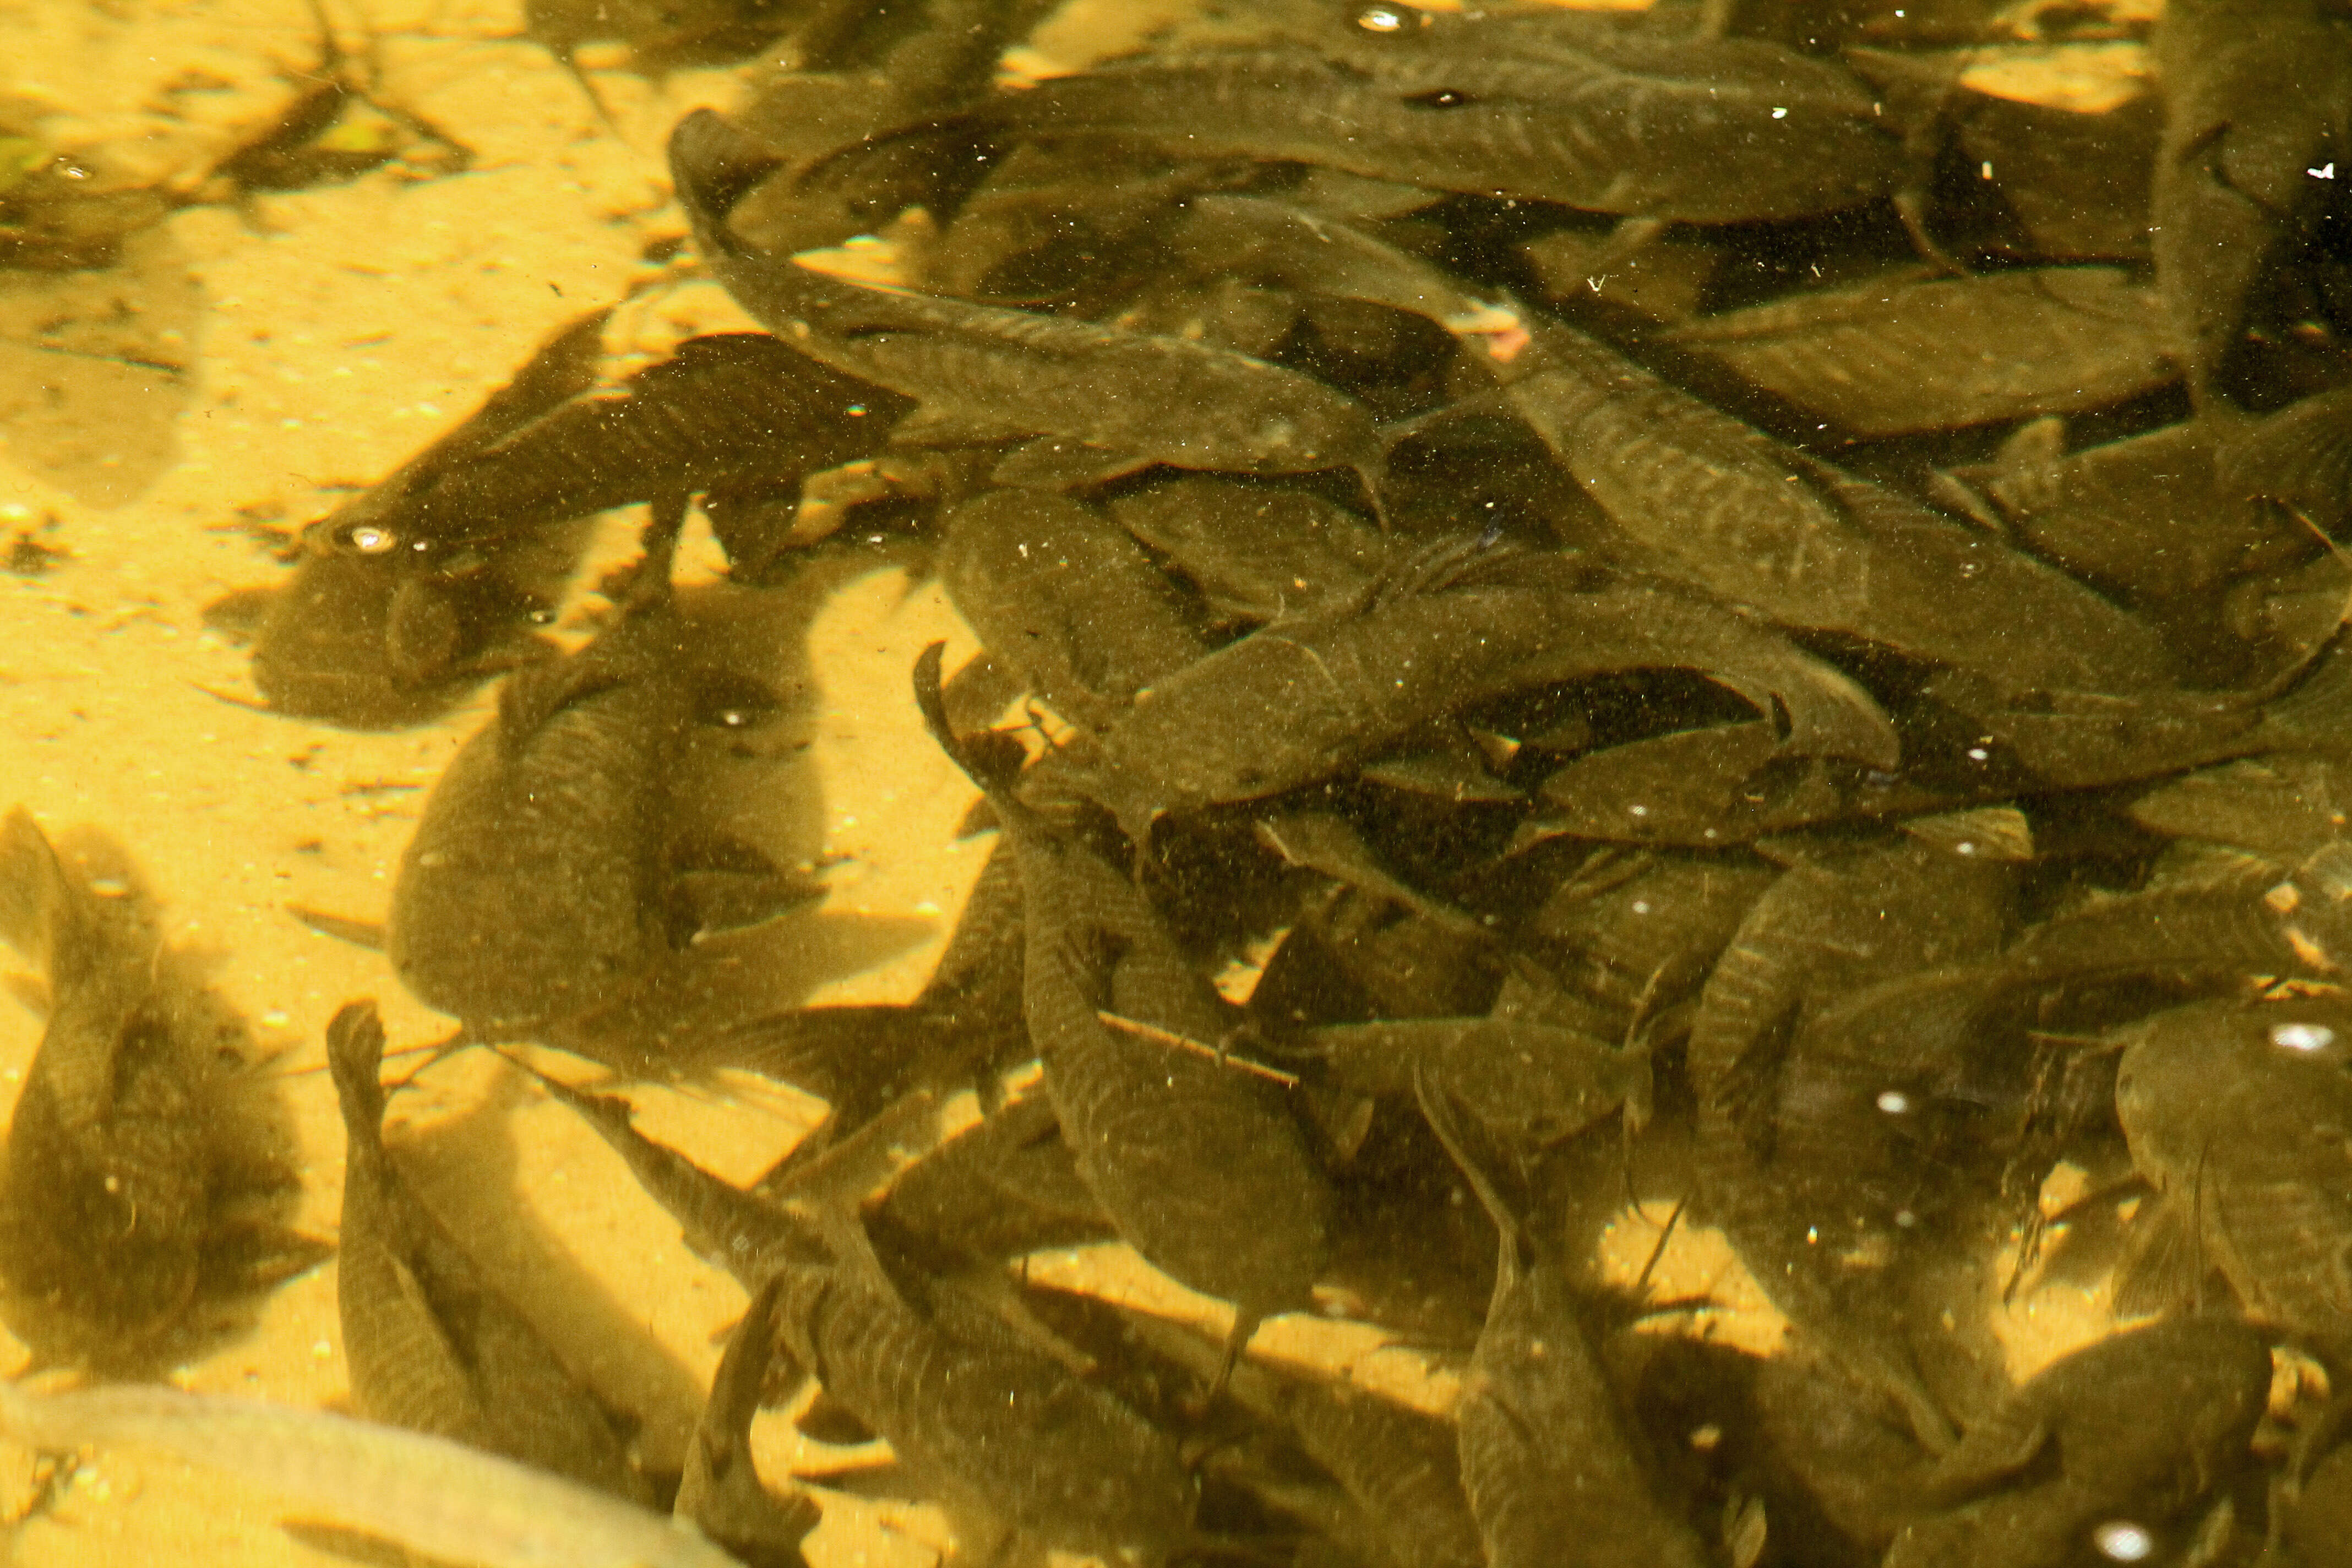 Image of callichthyid armored catfishes